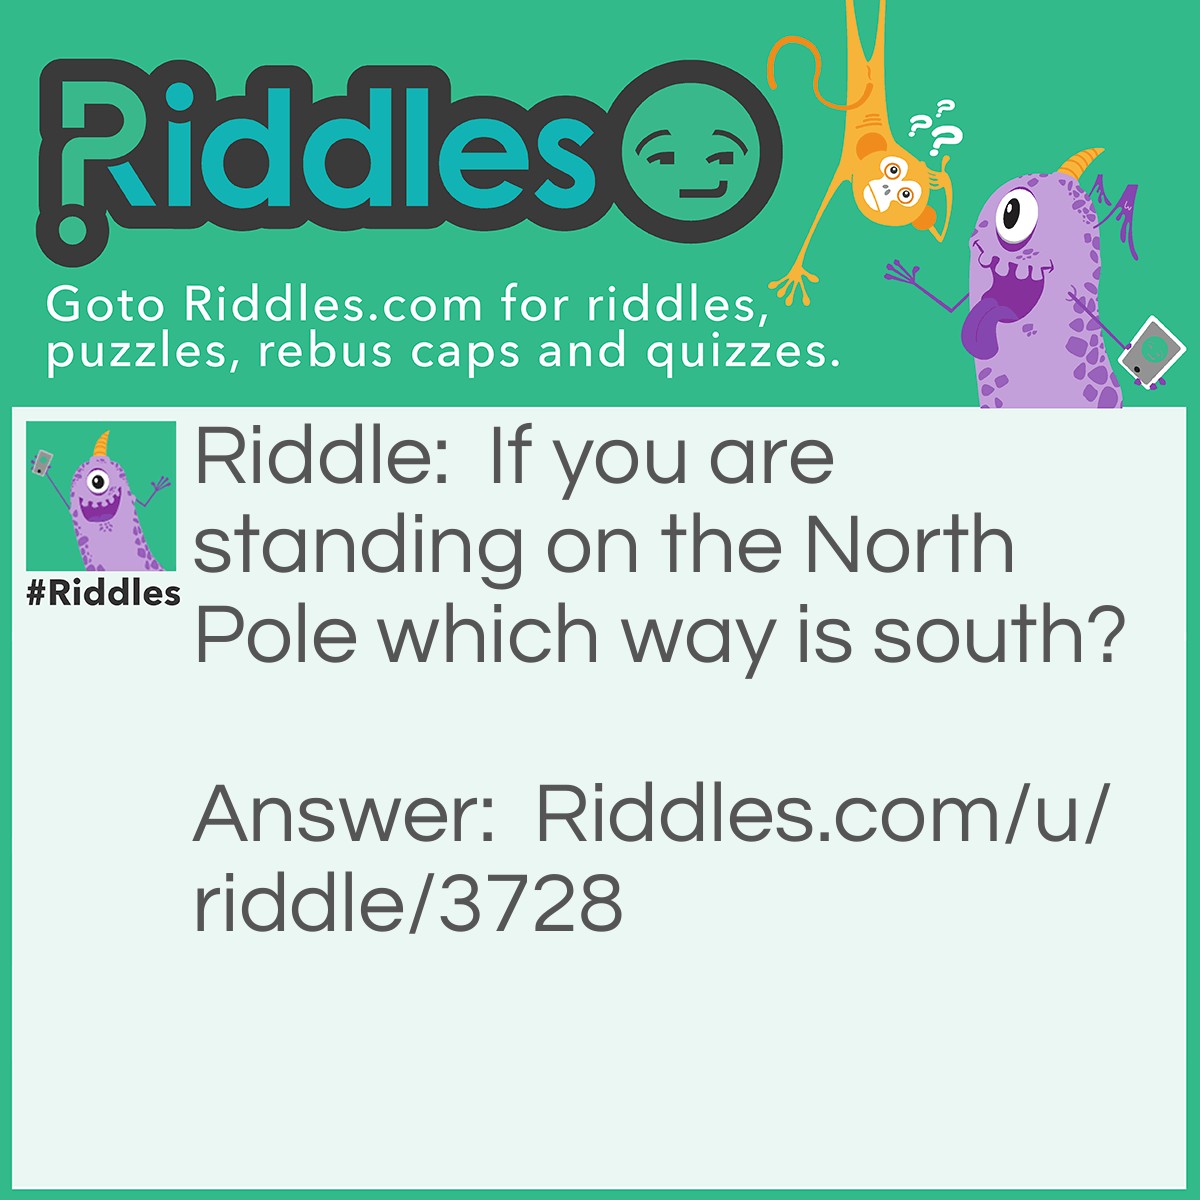 Riddle: If you are standing on the North Pole which way is south? Answer: Every direction because you're on the northern most point on earth.